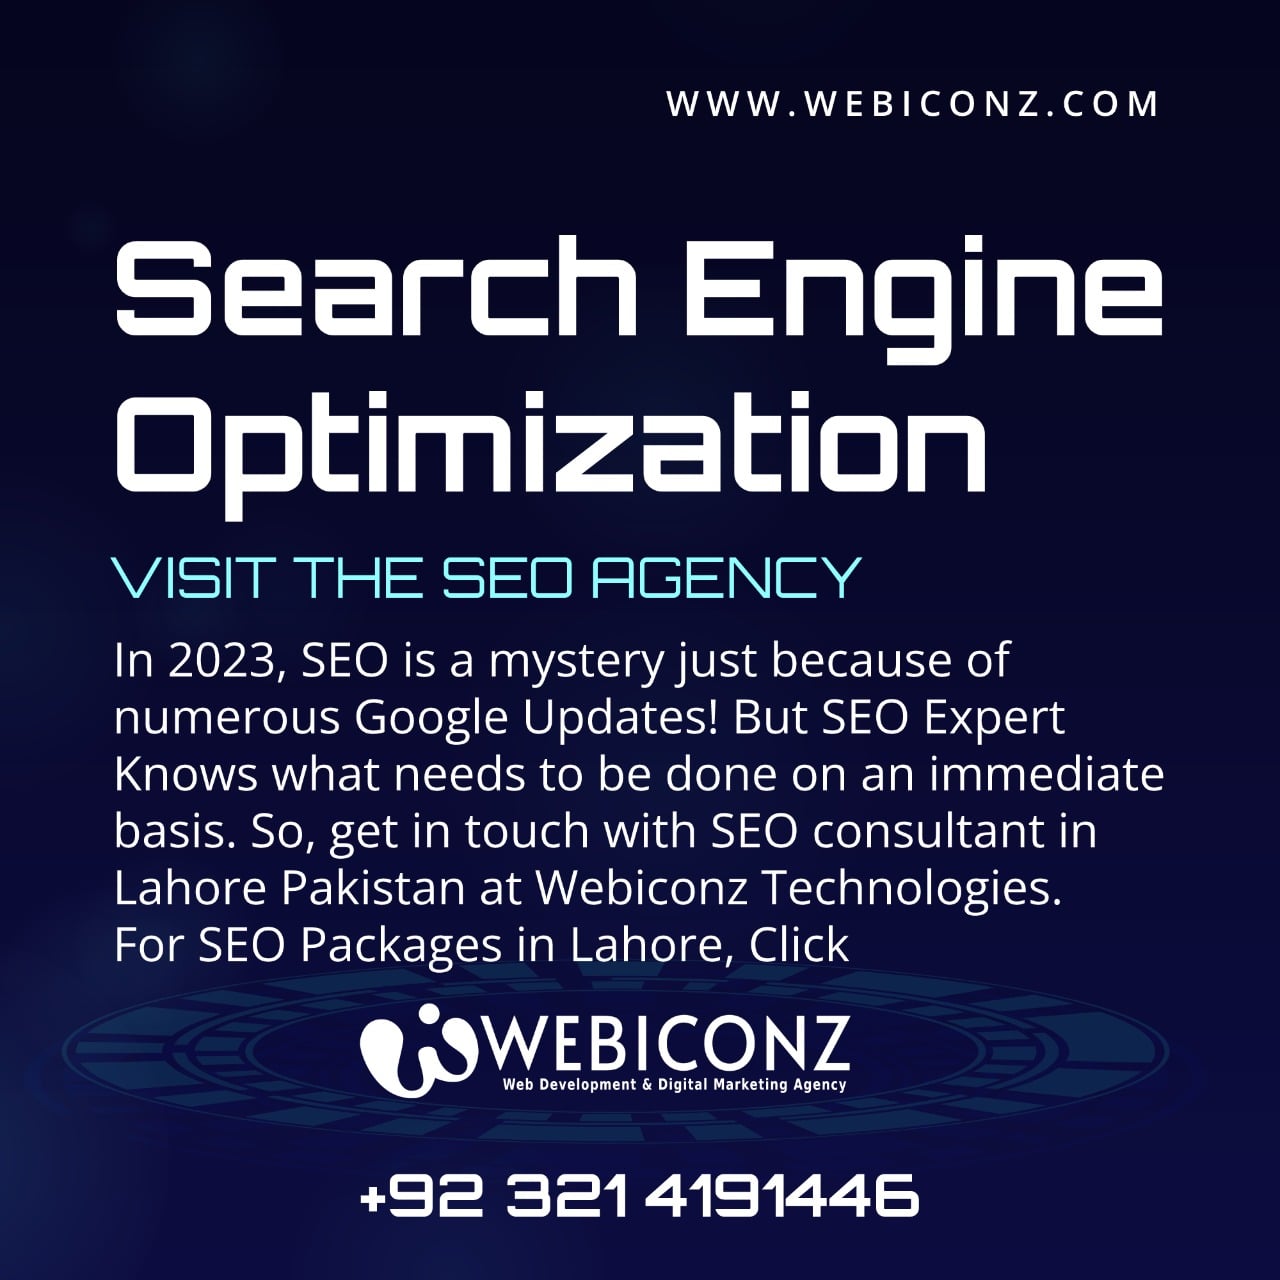 best seo company in Lahore, seo consultant in Lahore, best seo services in Lahore webiconz, seo services in lahore, seo packages in lahore, seo company in lahore, seo expert in lahore, seo agency in lahore, seo packages in pakistan, best seo expert in lahore, seo services in pakistan,